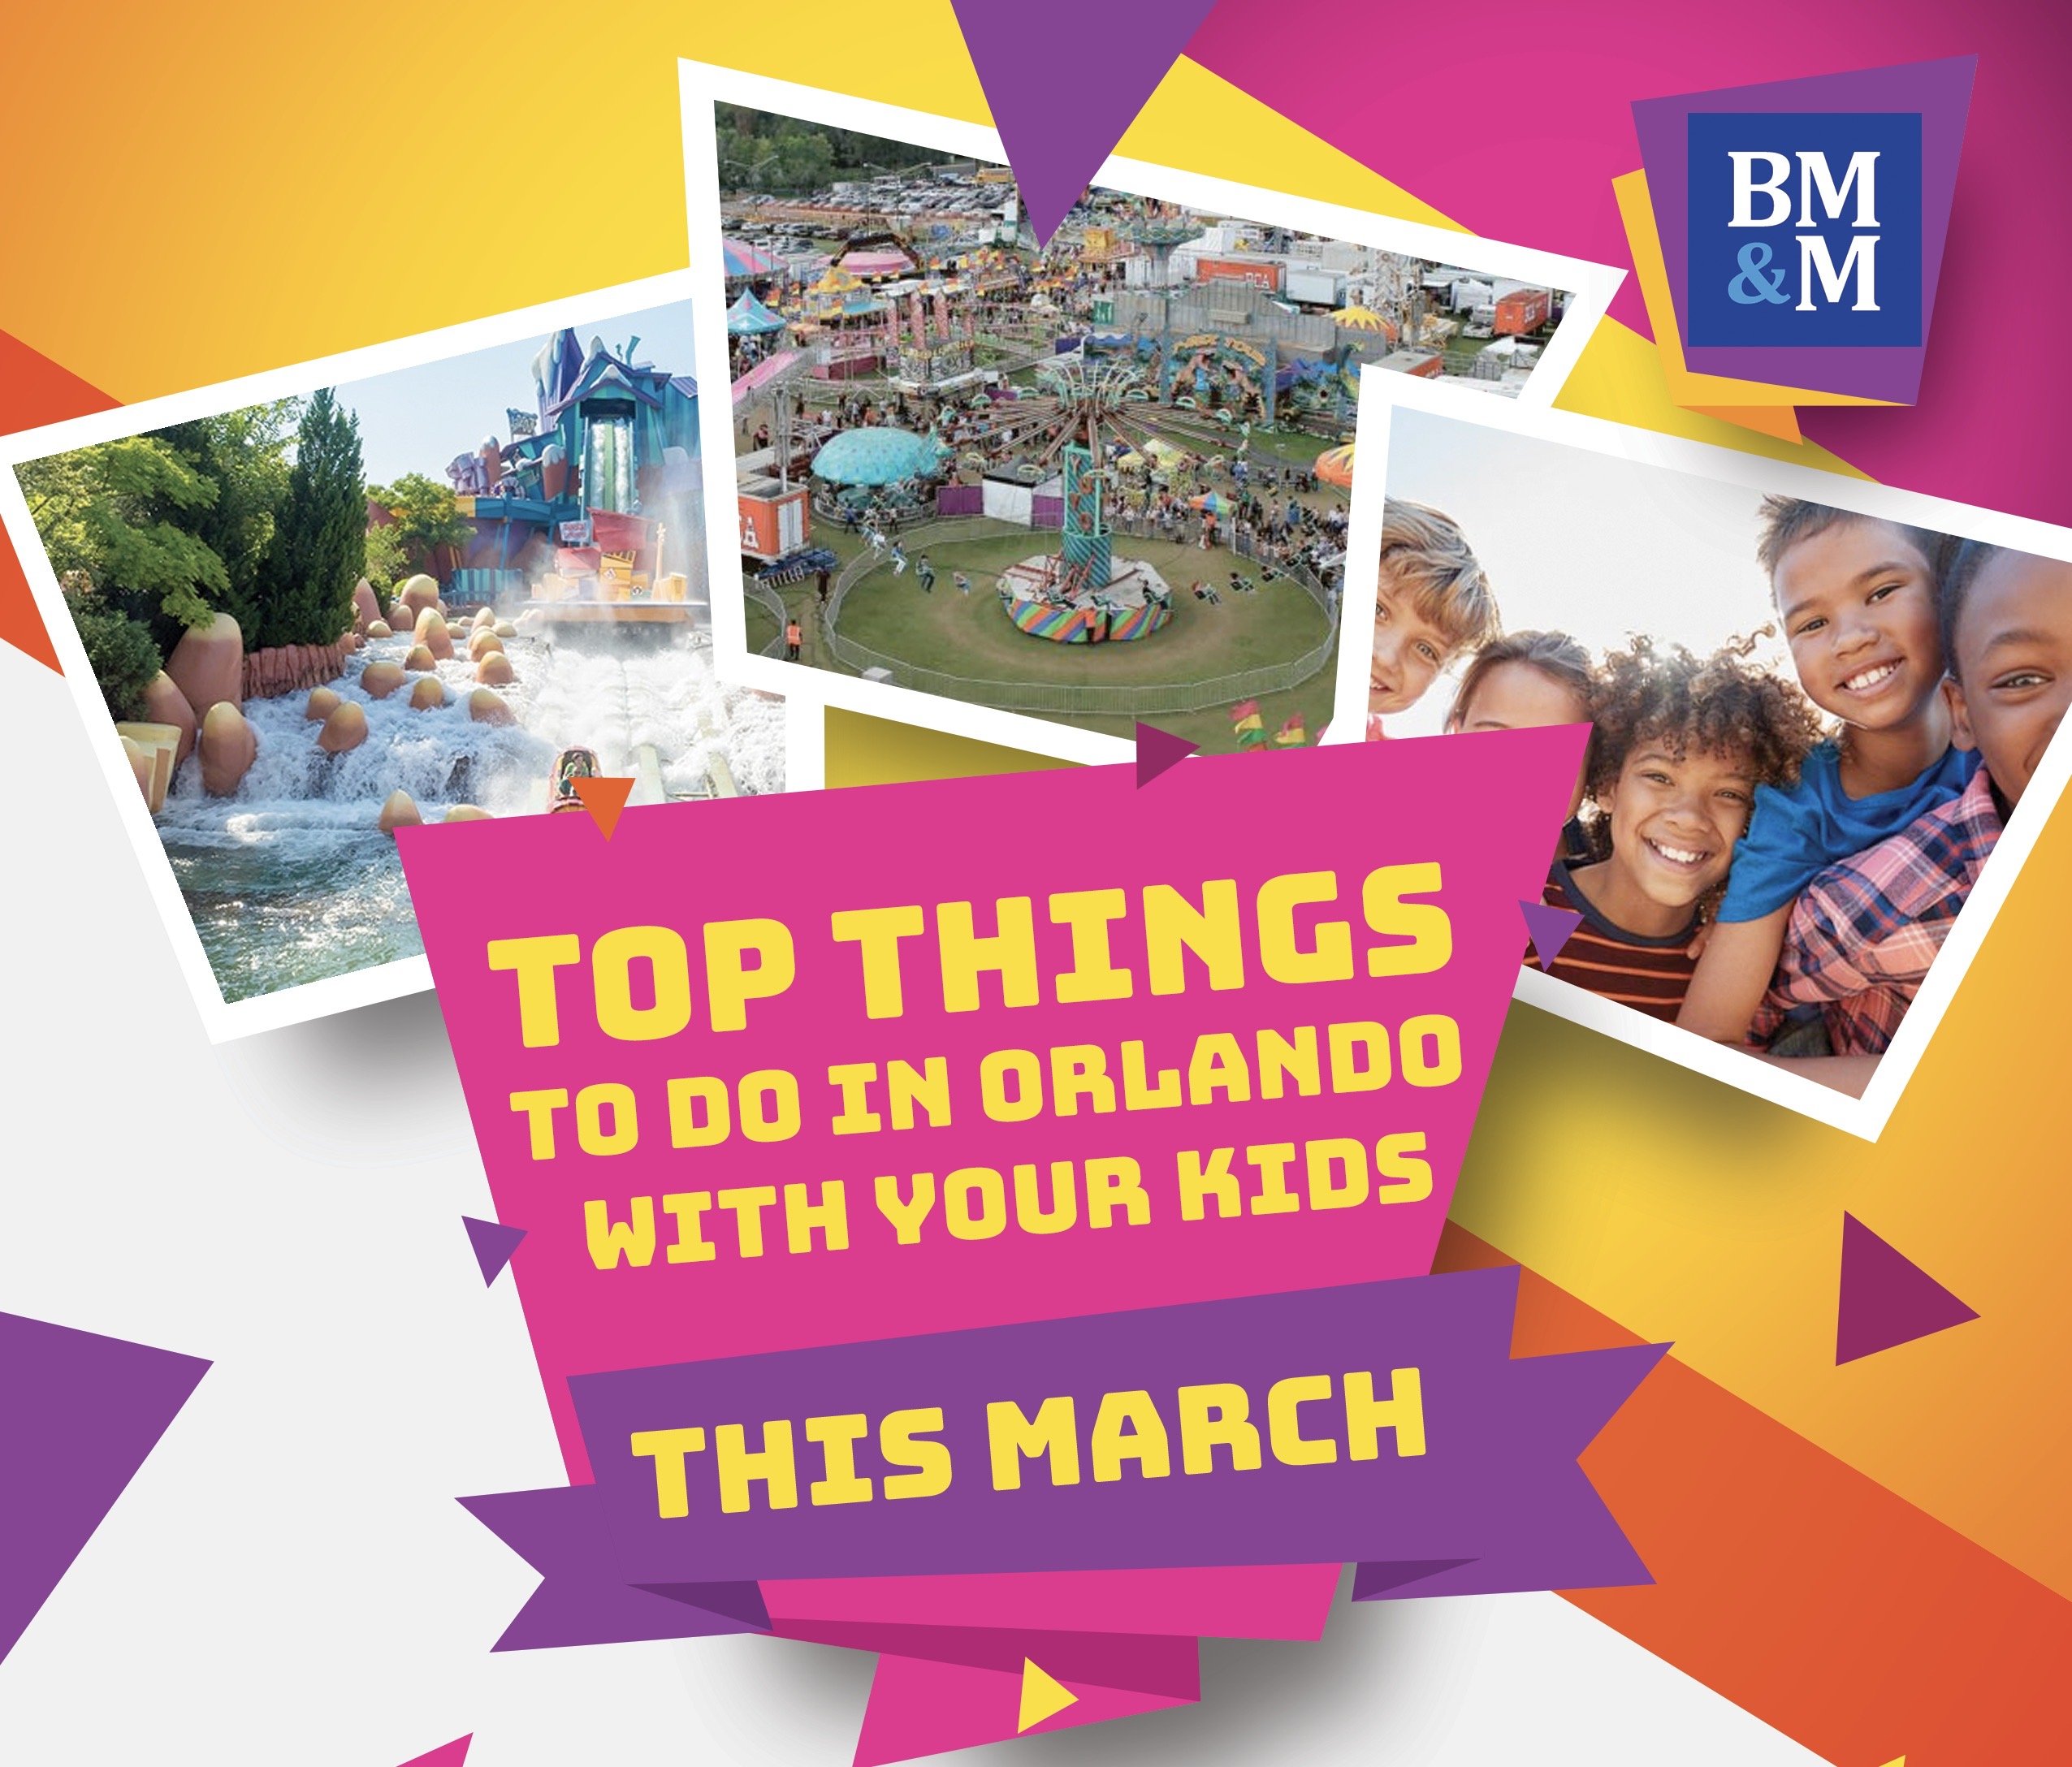 Top Things To Do in Orlando with your Kids this March